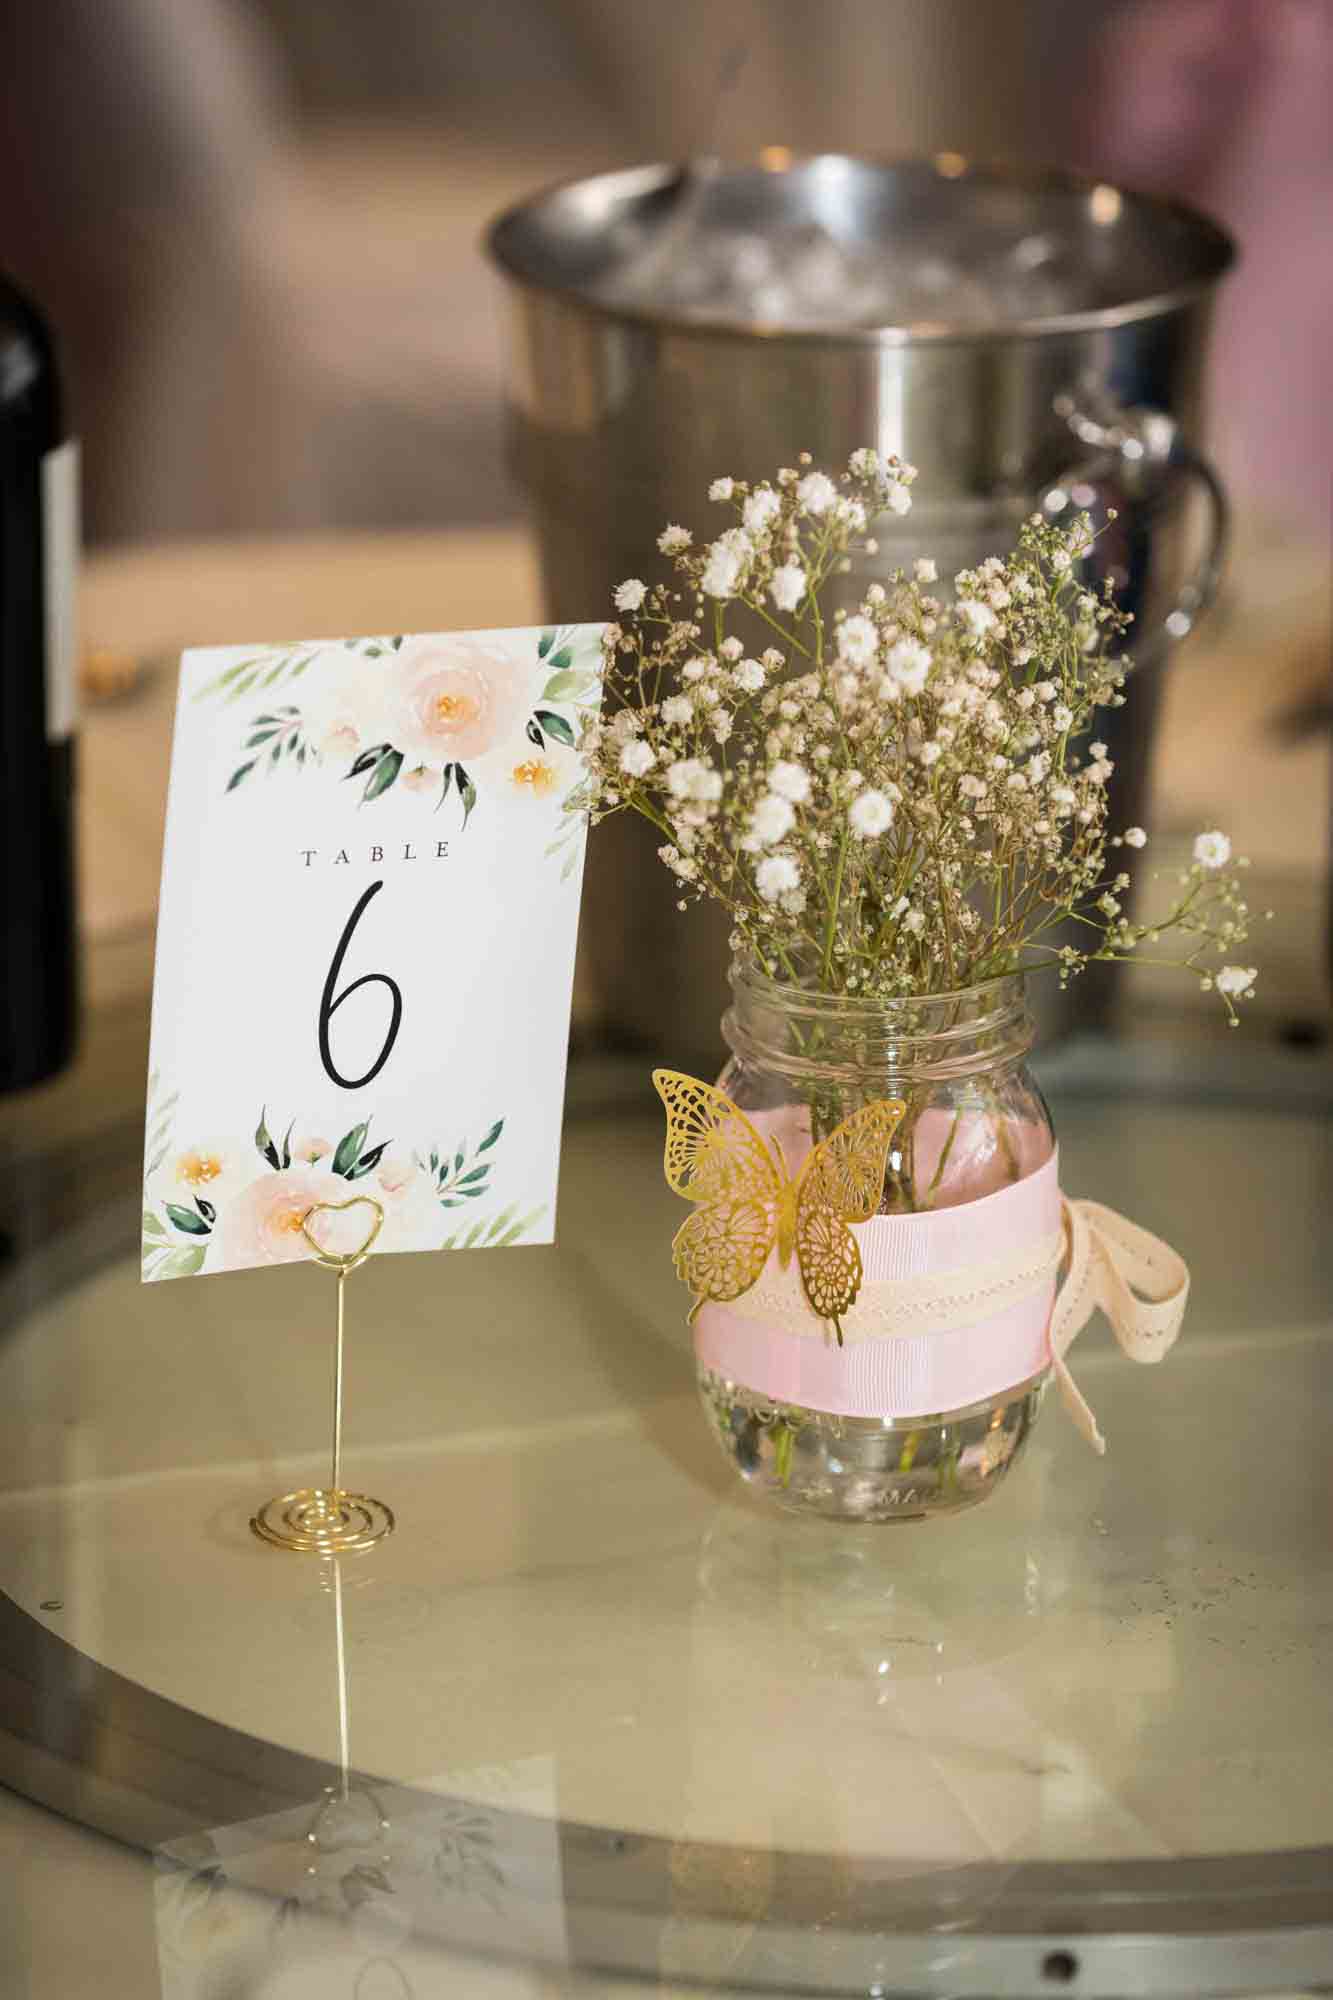 Glass vase holding bouquet of baby's breath with gold butterfly and number 6 table number at a Sheraton LaGuardia East Hotel wedding